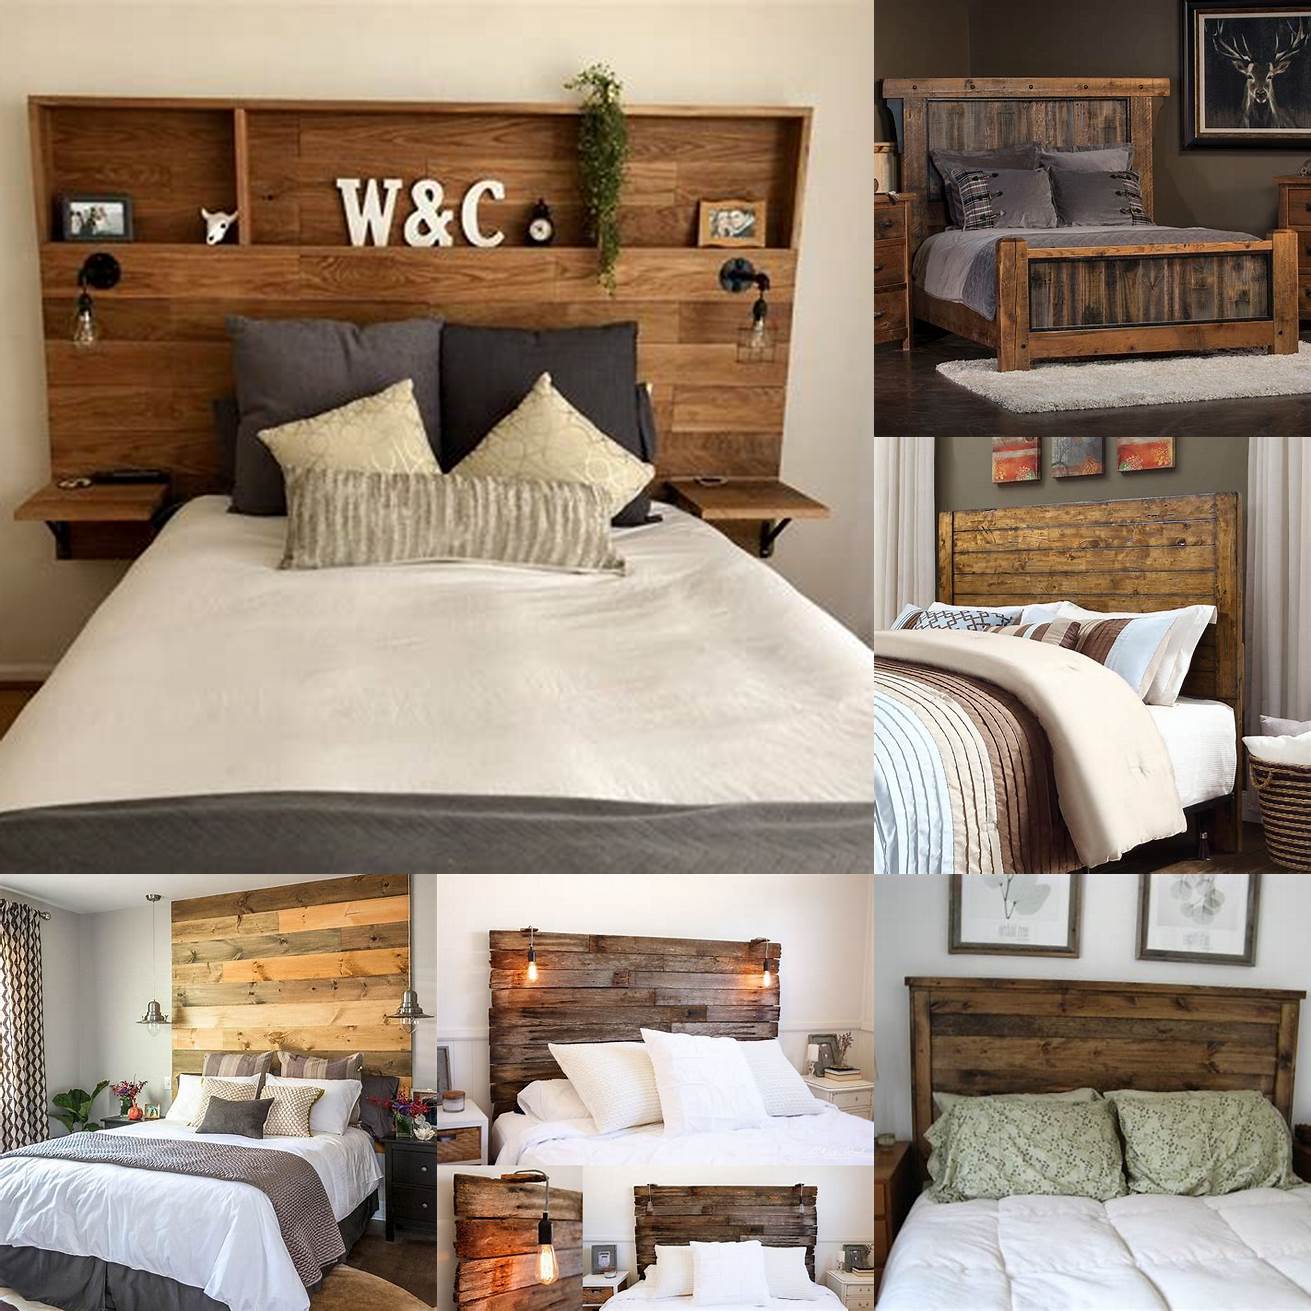 This rustic-style floor bed features a wooden headboard and earthy-toned bedding